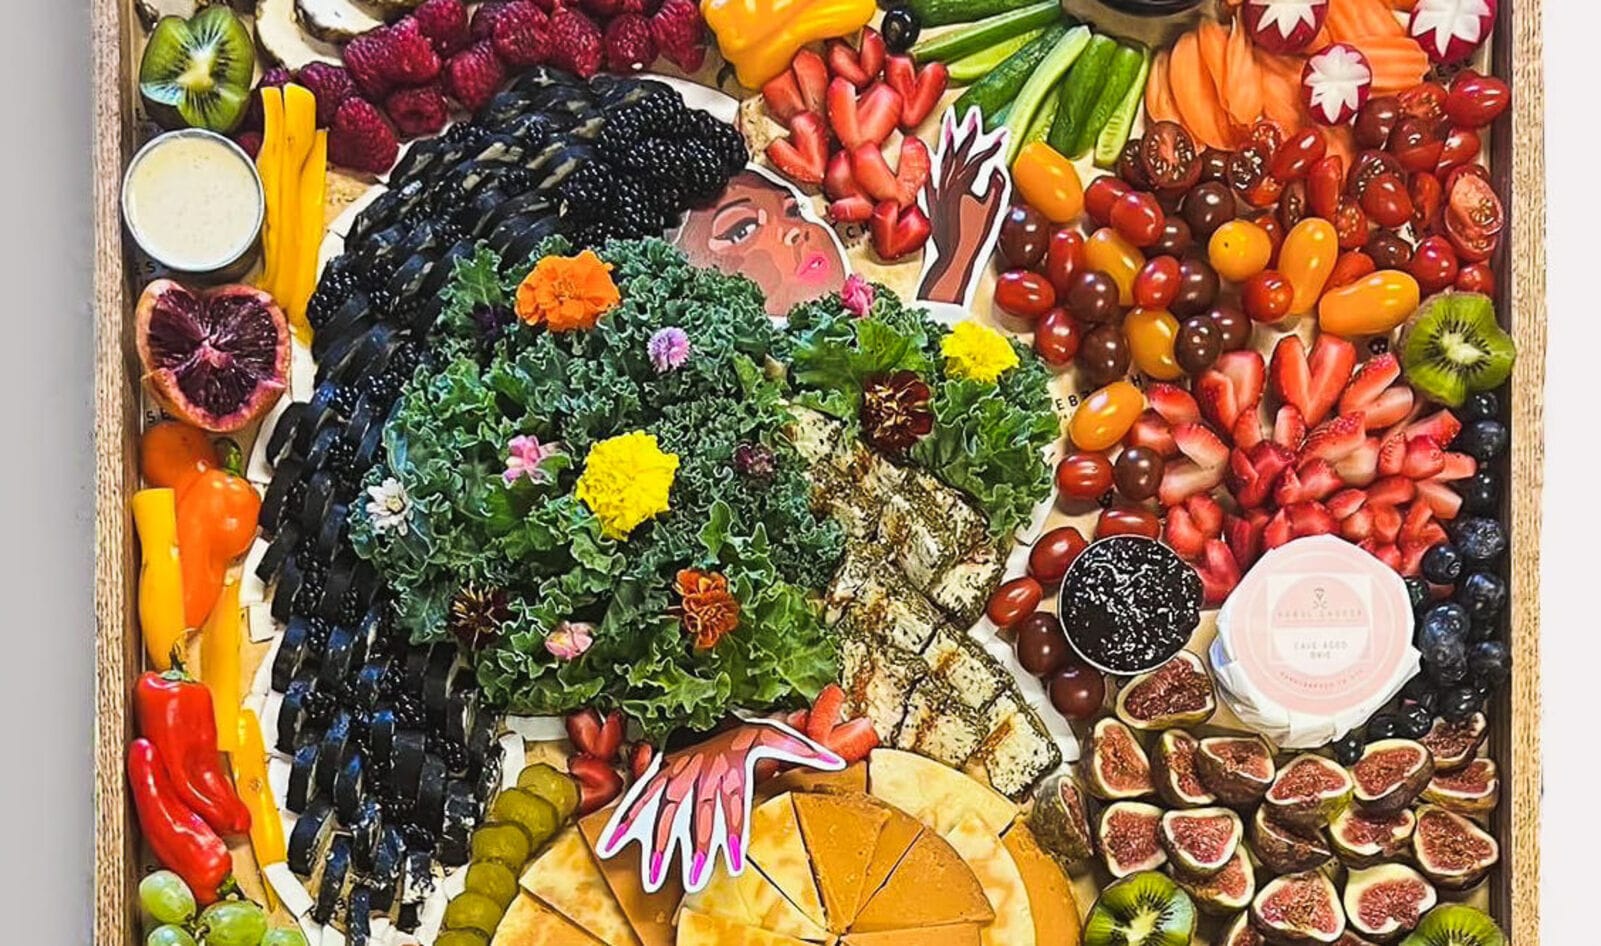 Lizzo: This Custom Vegan Cheese Board Made for You Is a Masterpiece&nbsp;